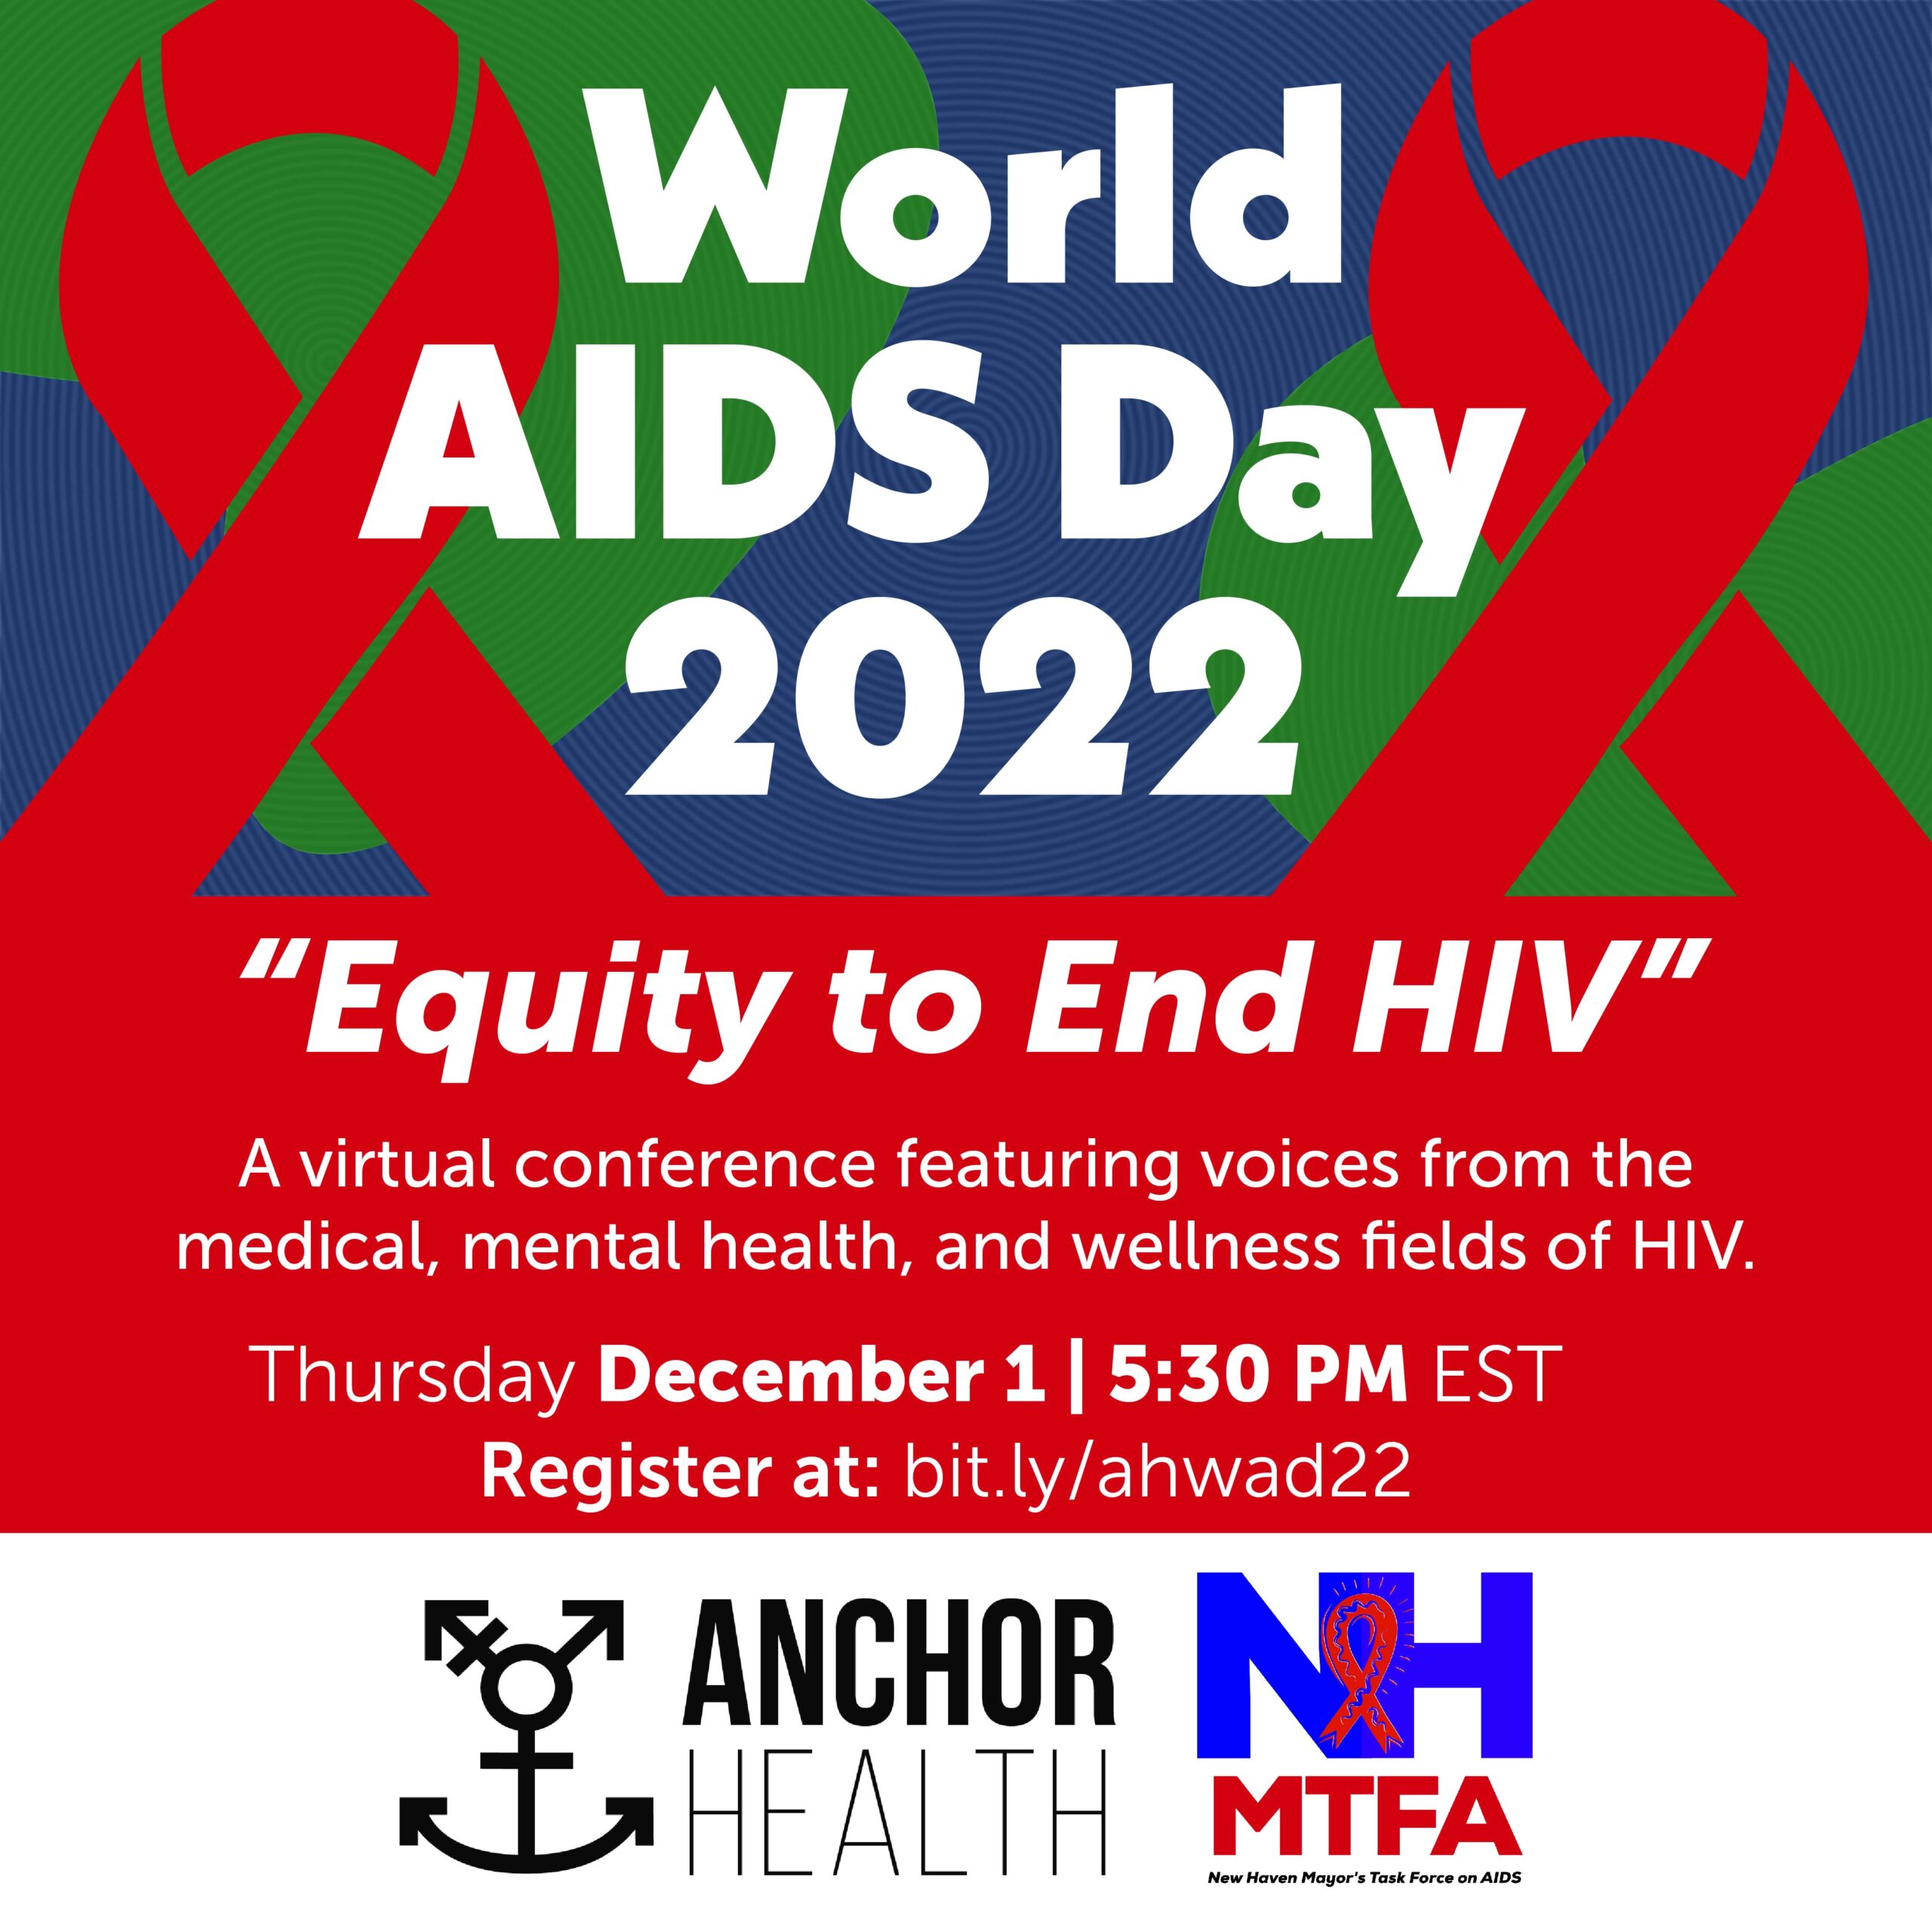 World AIDS Day "Equity to End HIV"